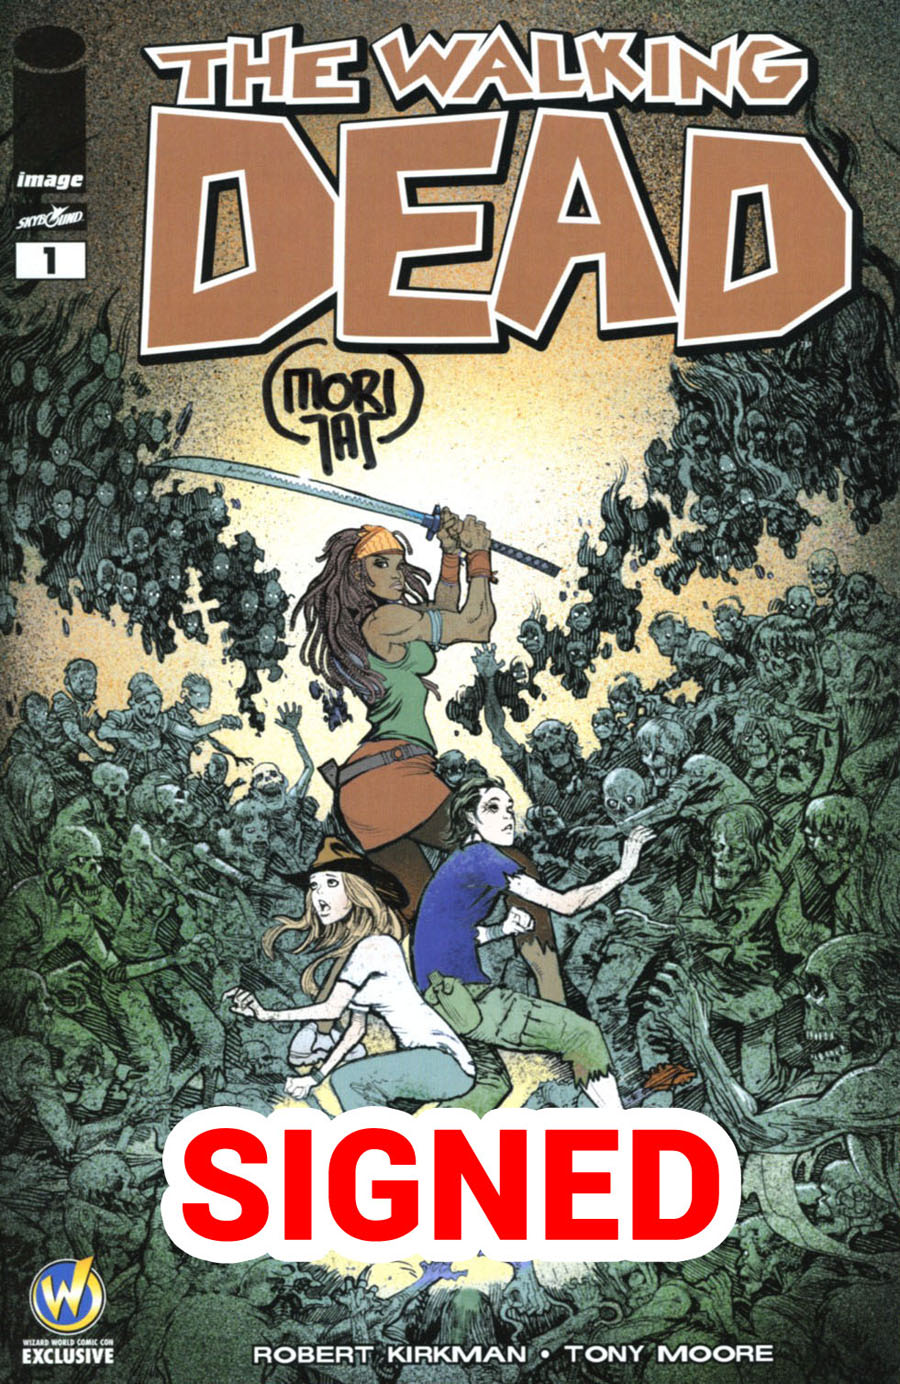 Walking Dead #1 Cover Z-Z Wizard World Comic Con Austin Exclusive Moritat Color Variant Cover Signed by Moritat